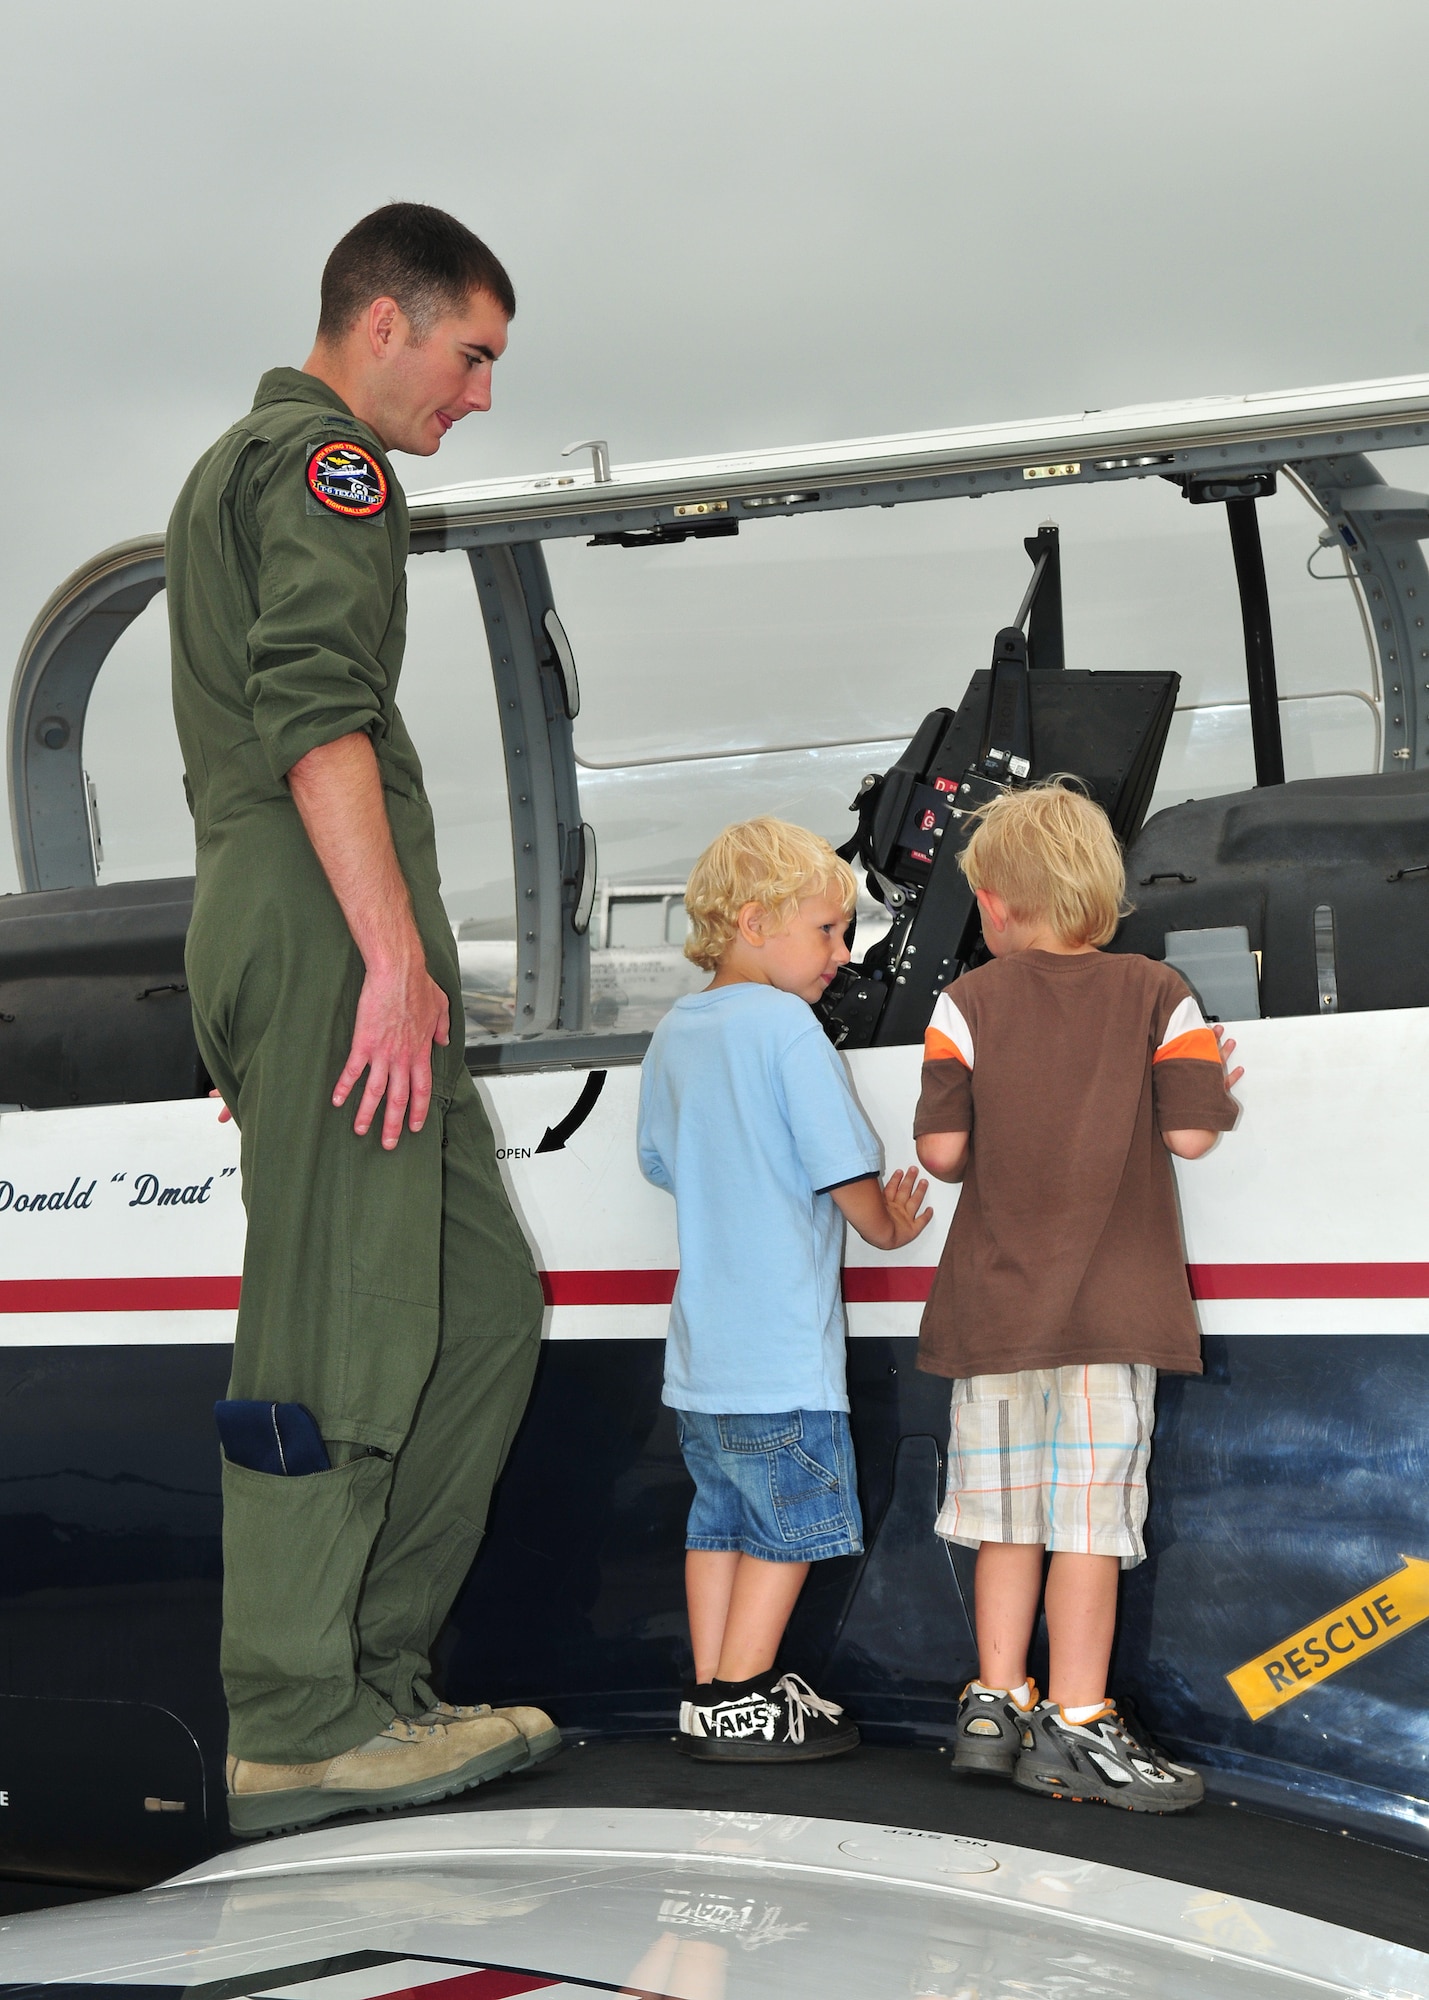 1st Lt. James Brantly from the 71st Flying Training Wing, Vance AFB, Oklahoma, gives young aviation enthusiasts an up close look at the T-6 Texan II trainer during the Volk Field Air National Guard Base open house on August 21, 2010. Despite inclement weather, the Volk Field Open house attracted approximately 3000 visitors, 20 military and civilian aircraft, numerous vendors, and aerial performers from across the country. (U.S. Air Force photo by Master Sgt. Paul Gorman)